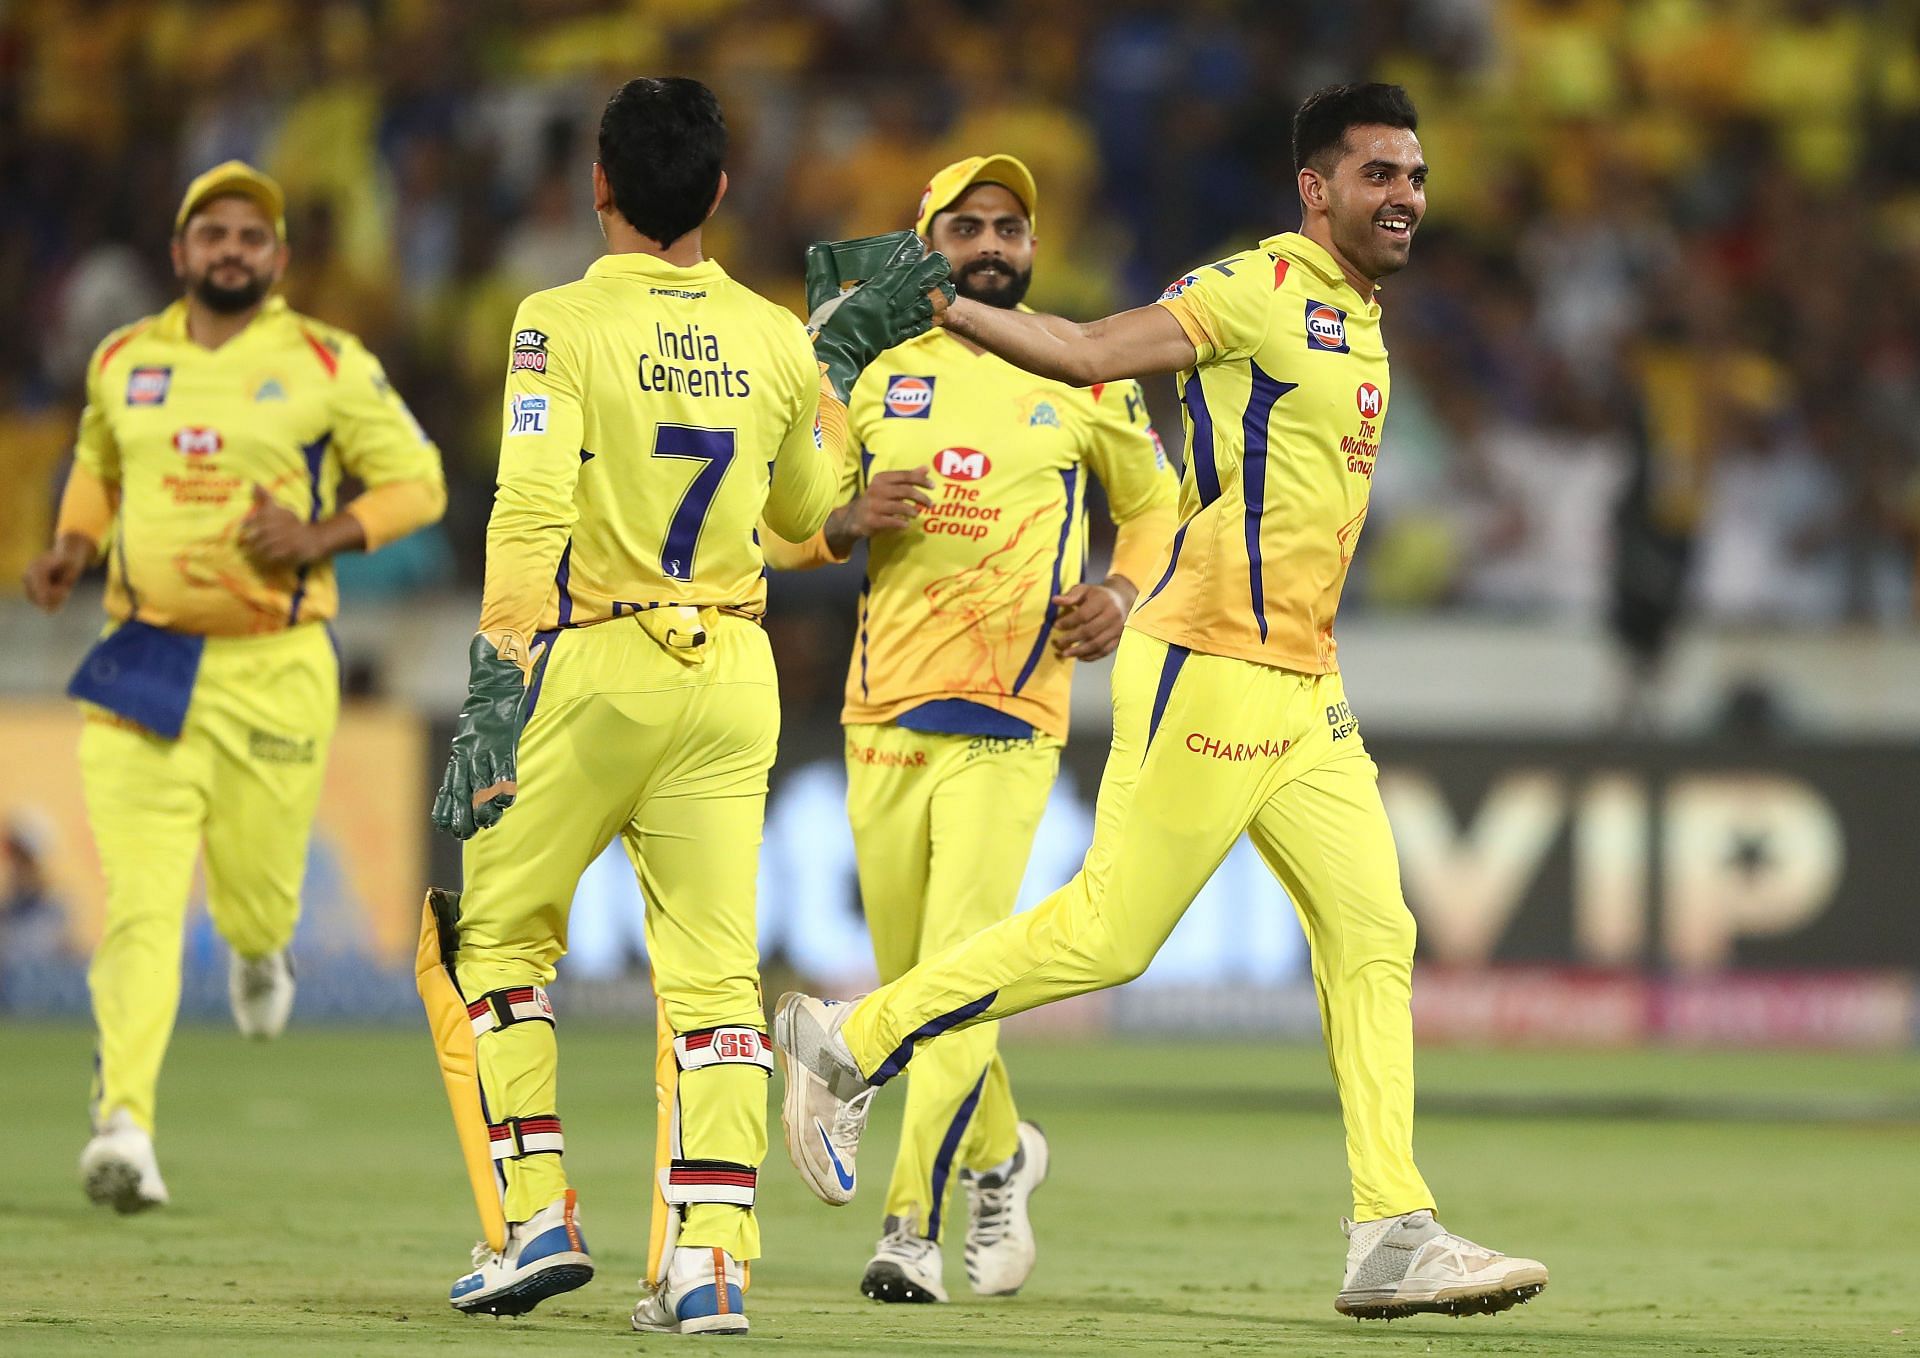 Deepak Chahar will continue representing CSK in the IPL